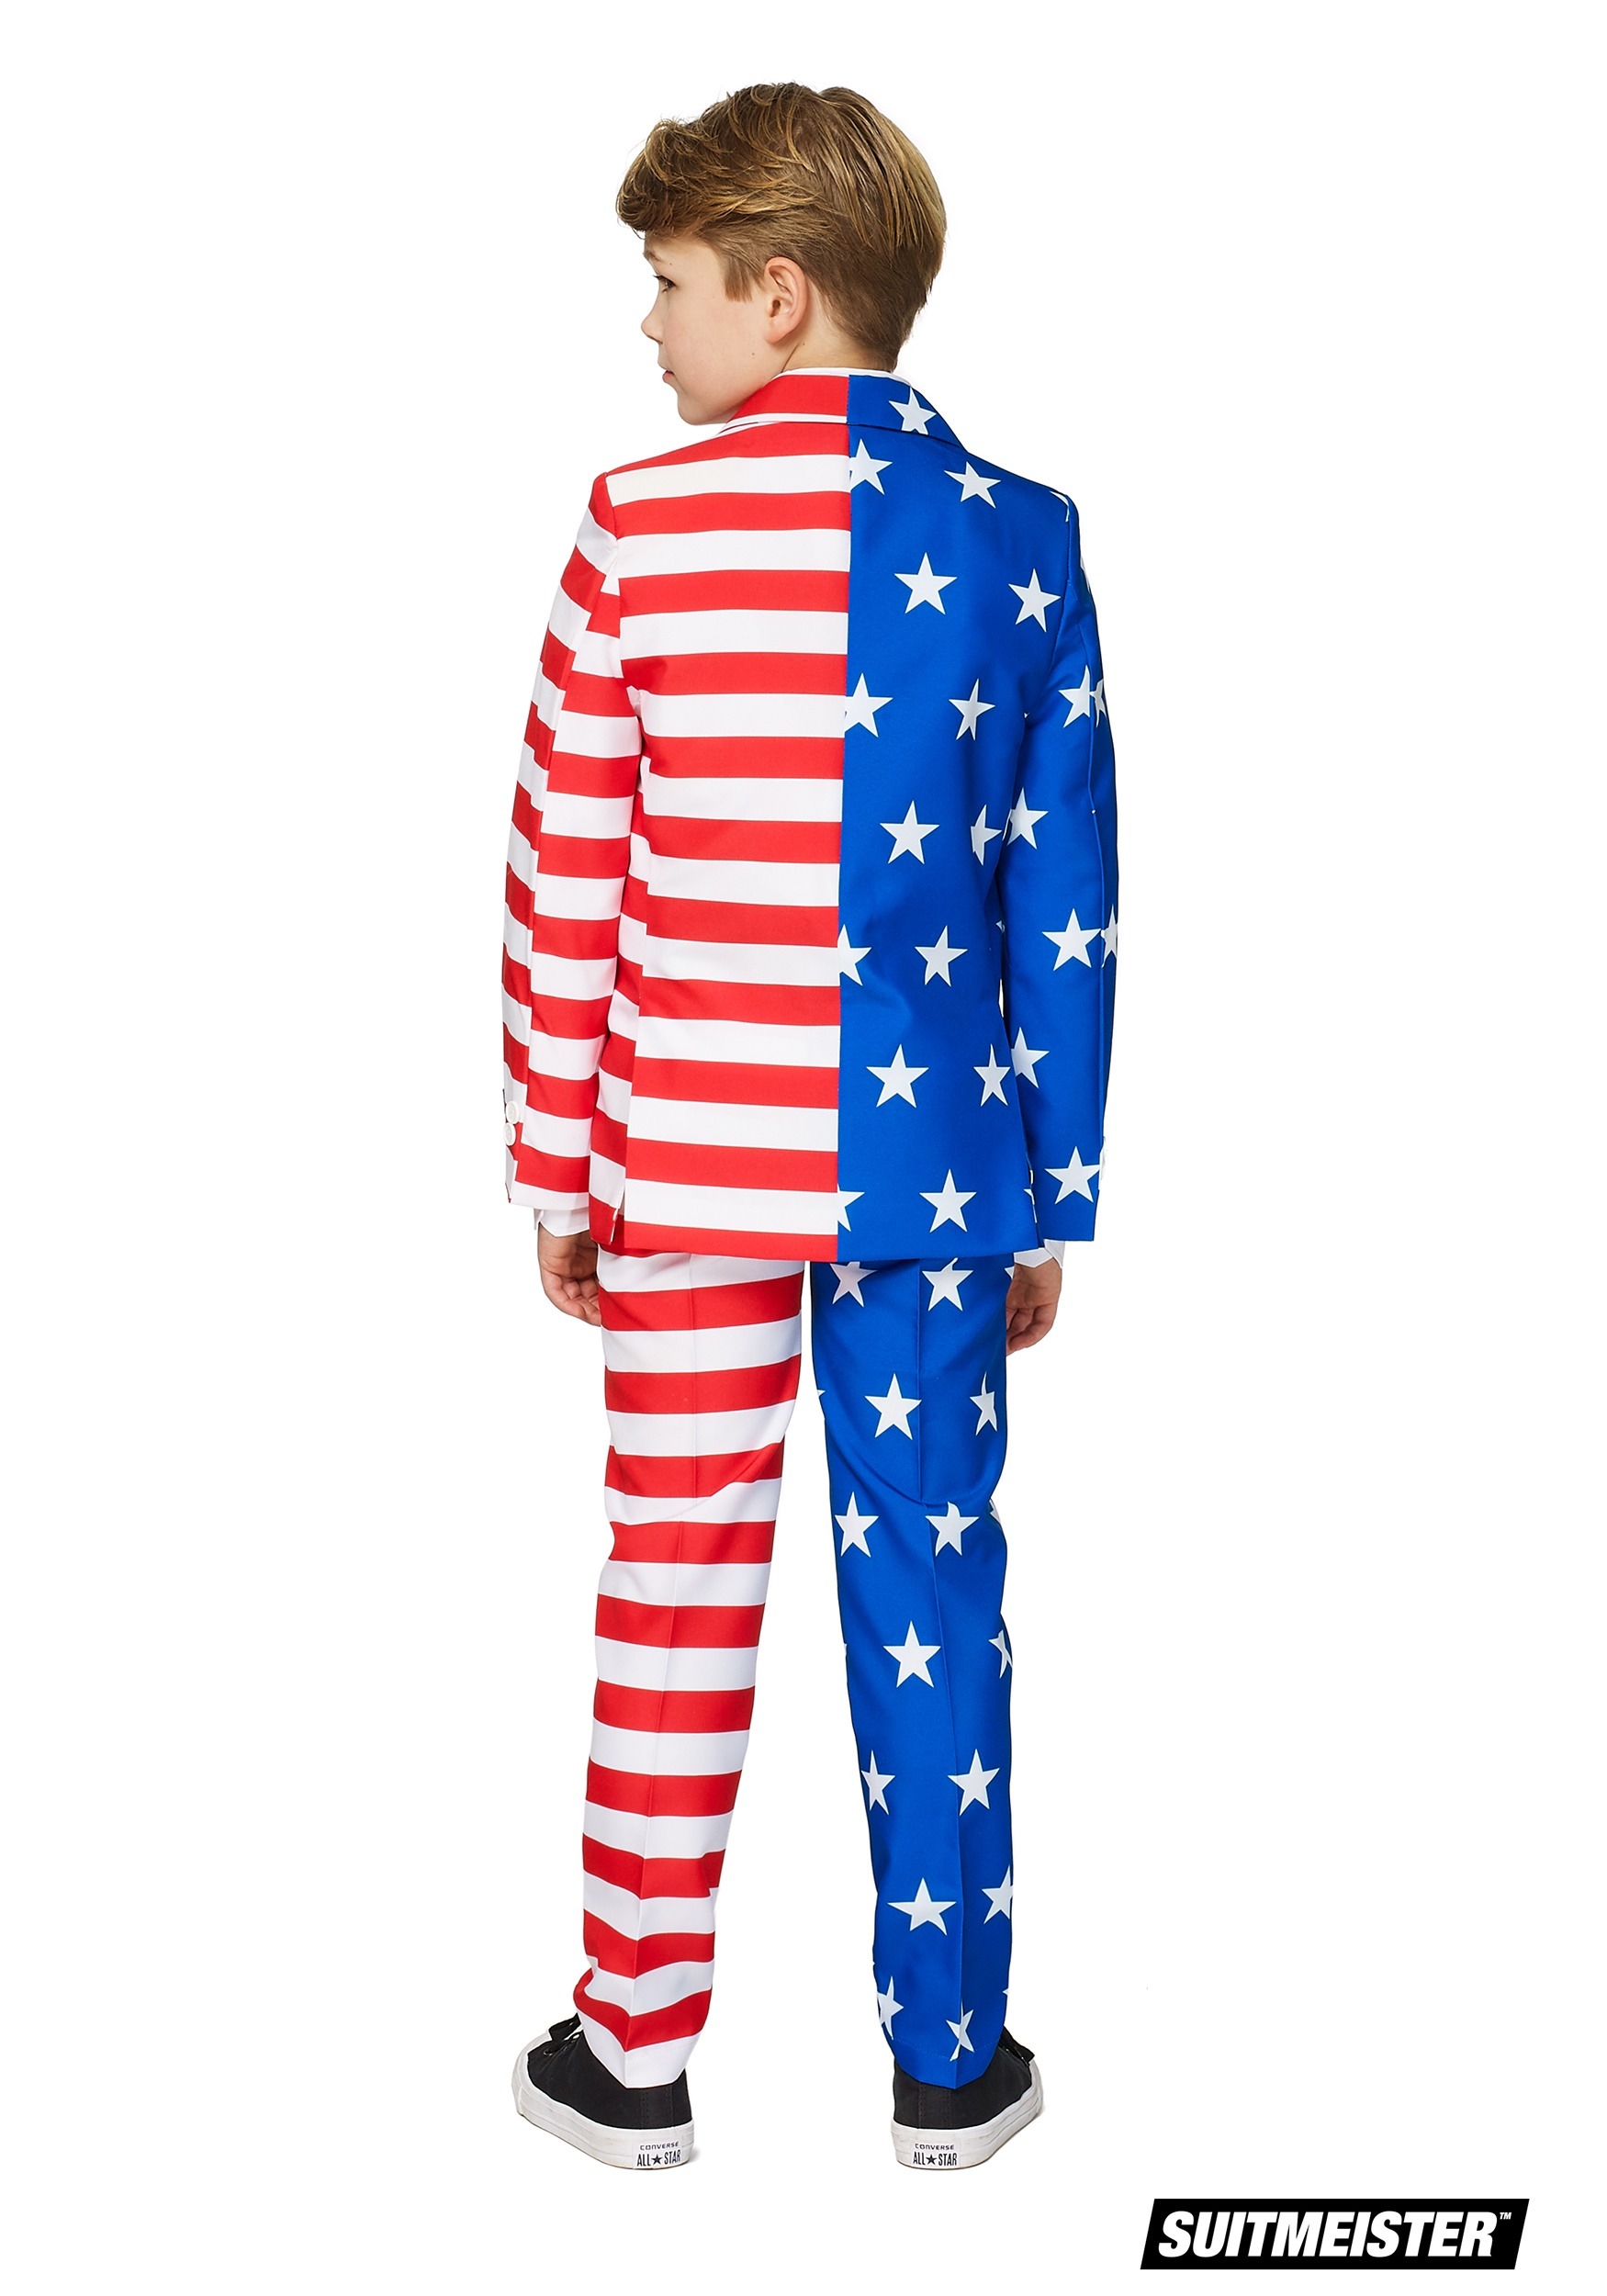 Suitmeister USA Suit with American Flag Print for Men Coming with Pants Perfect for 4th of July Jacket & Tie 